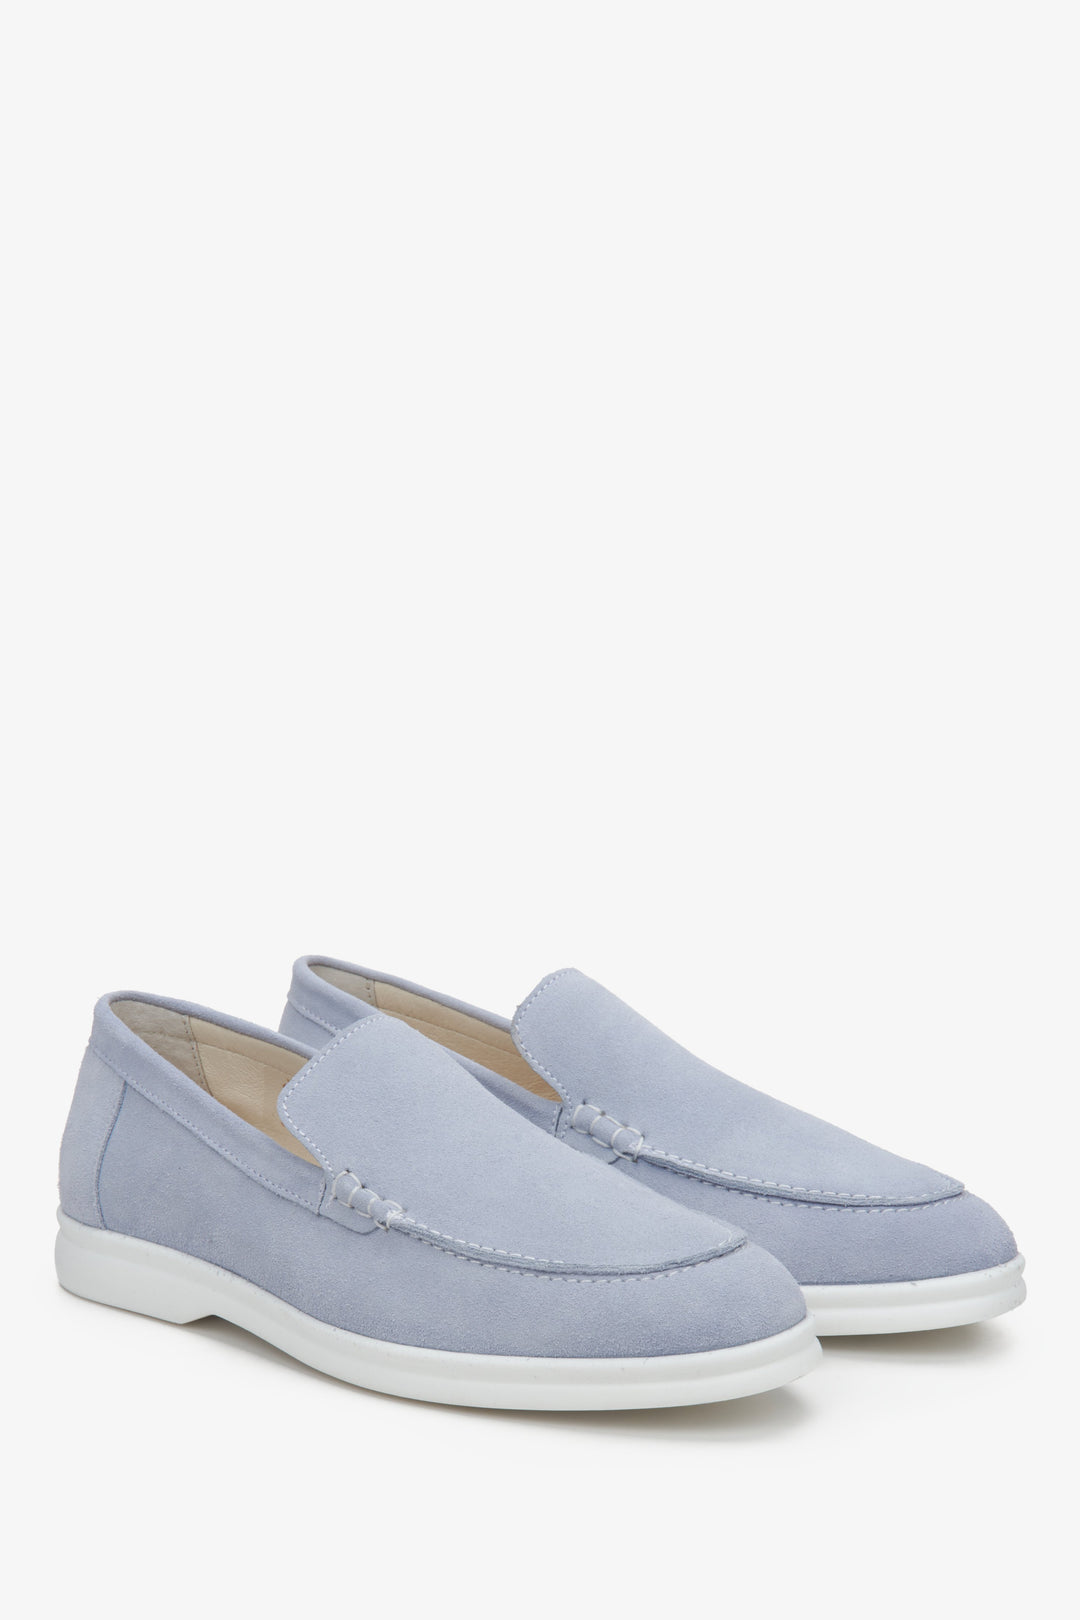 Women's suede loafers in light blue Estro - presentation of the sideline and white sole.